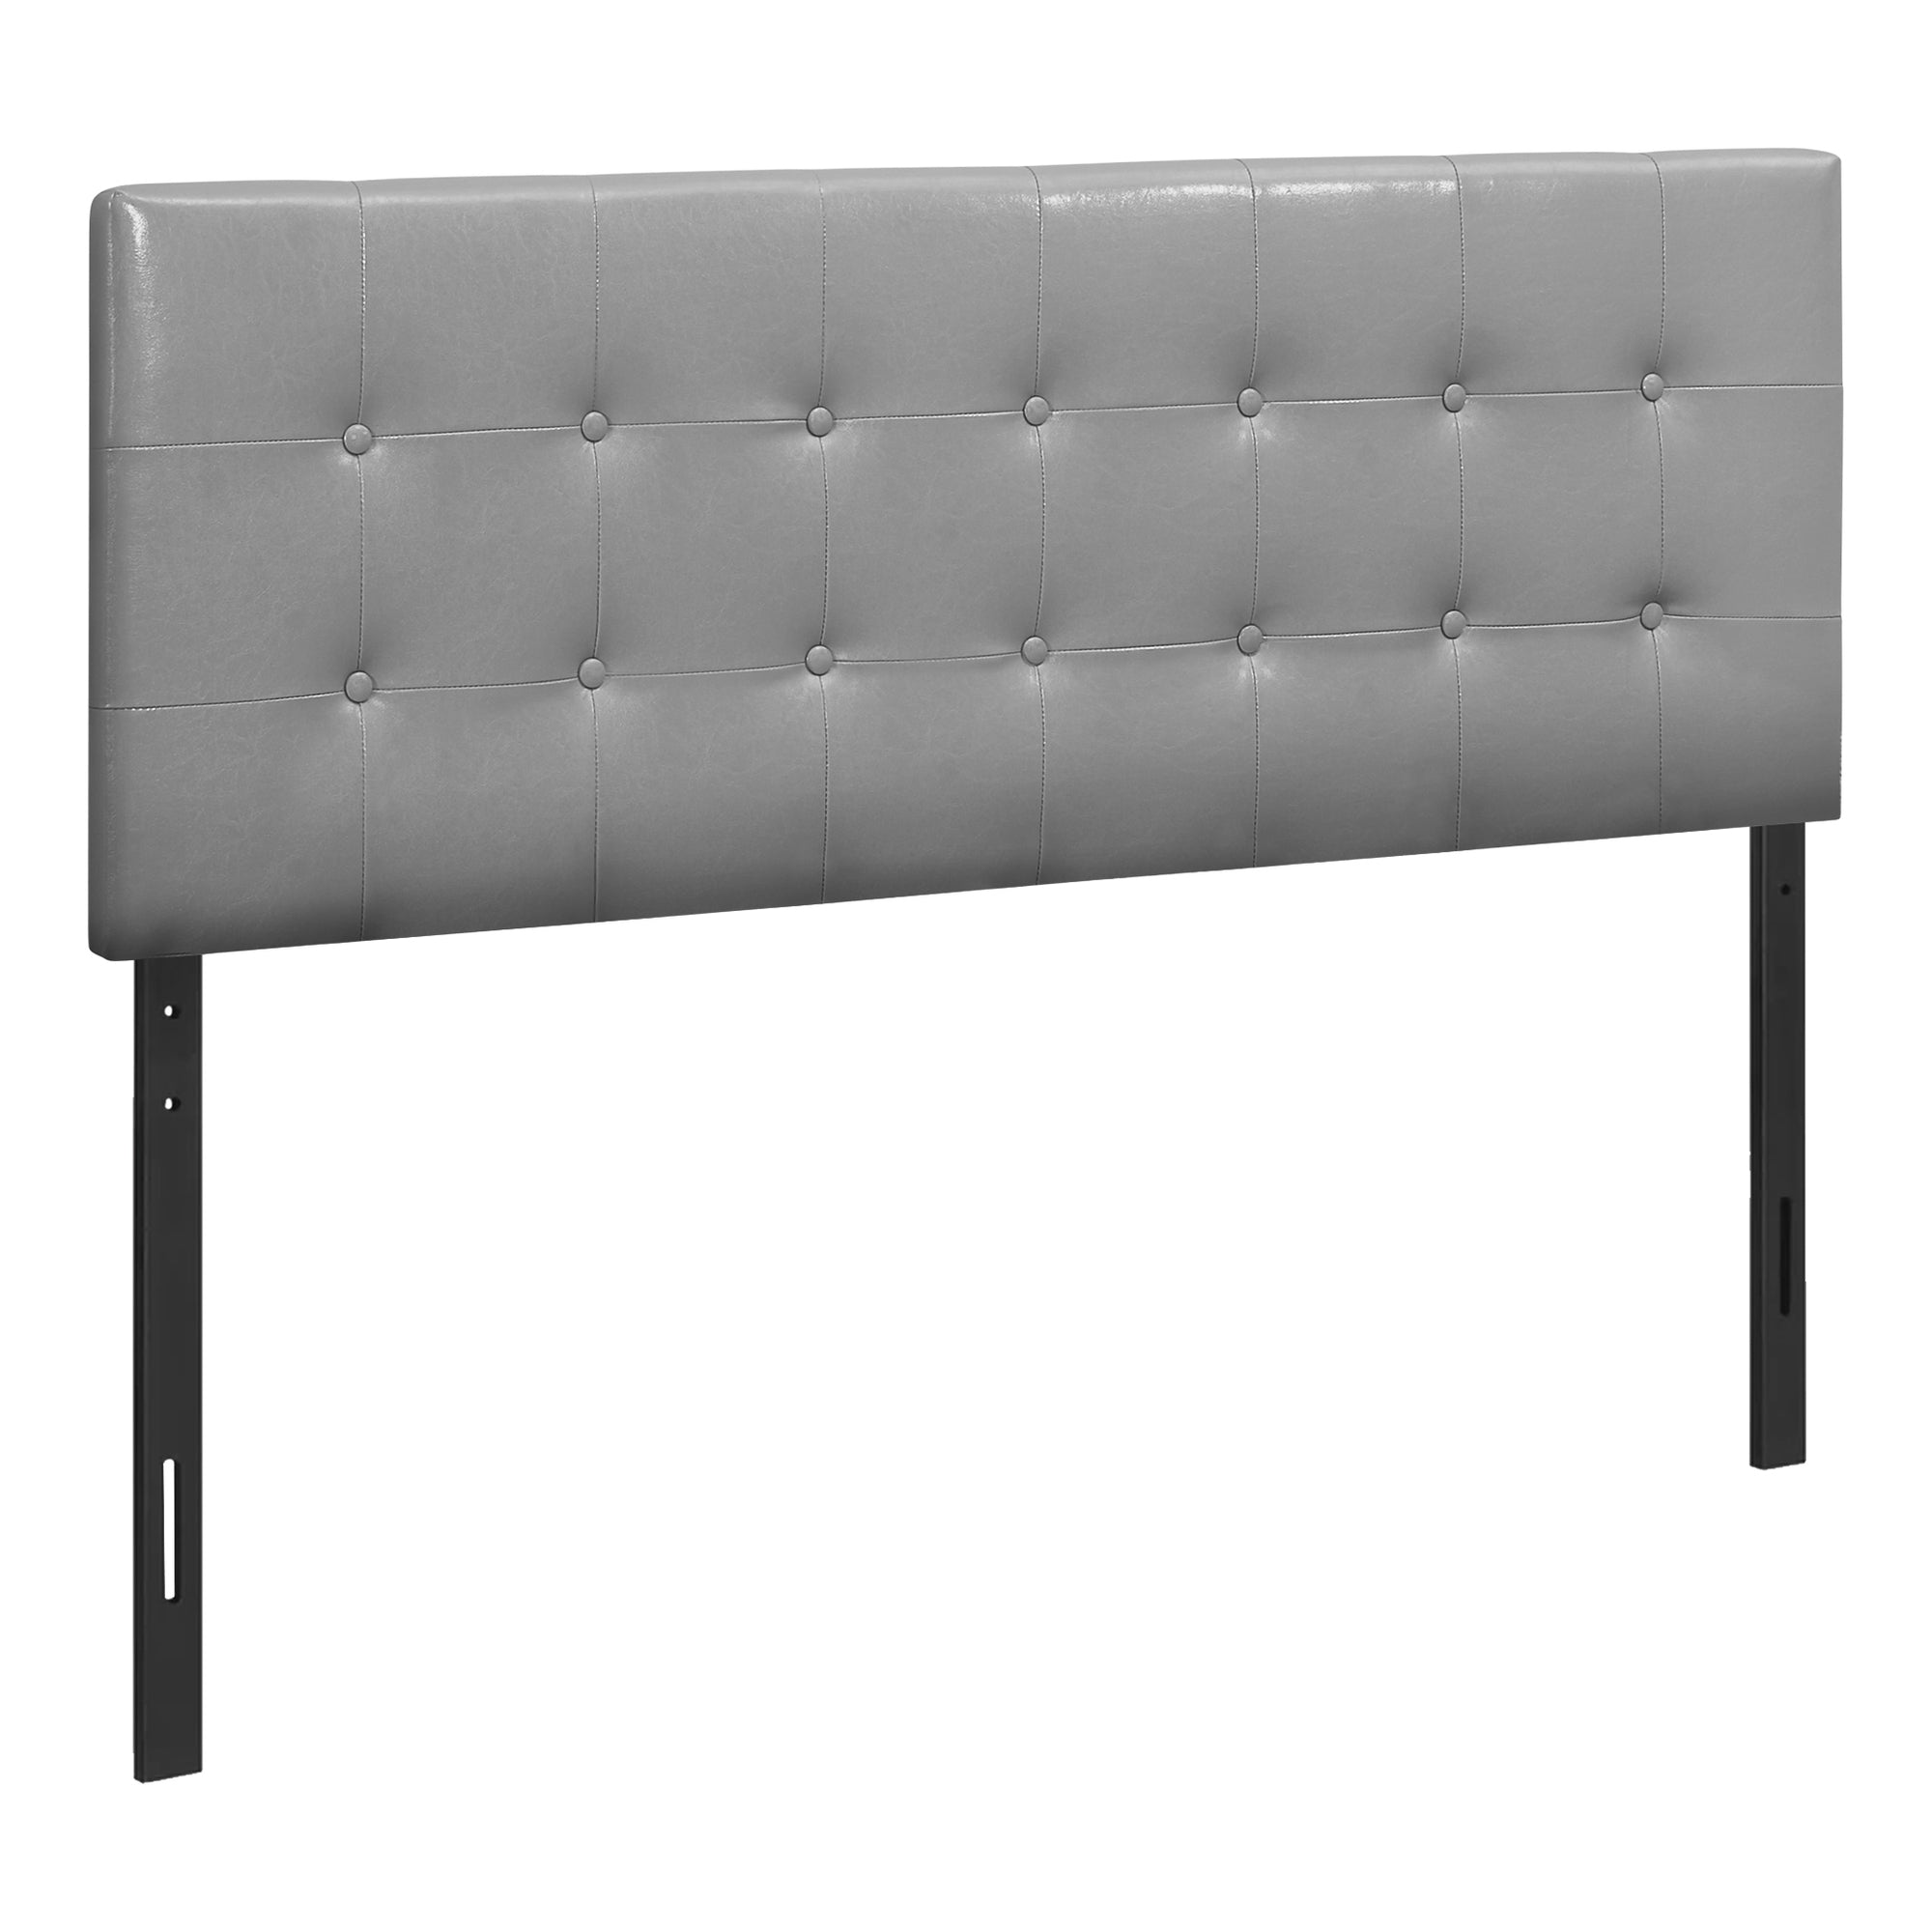 MN-376001Q    Headboard, Bedroom, Queen Size, Upholstered, Leather Look, Wooden Frame, Grey, Black, Contemporary, Modern